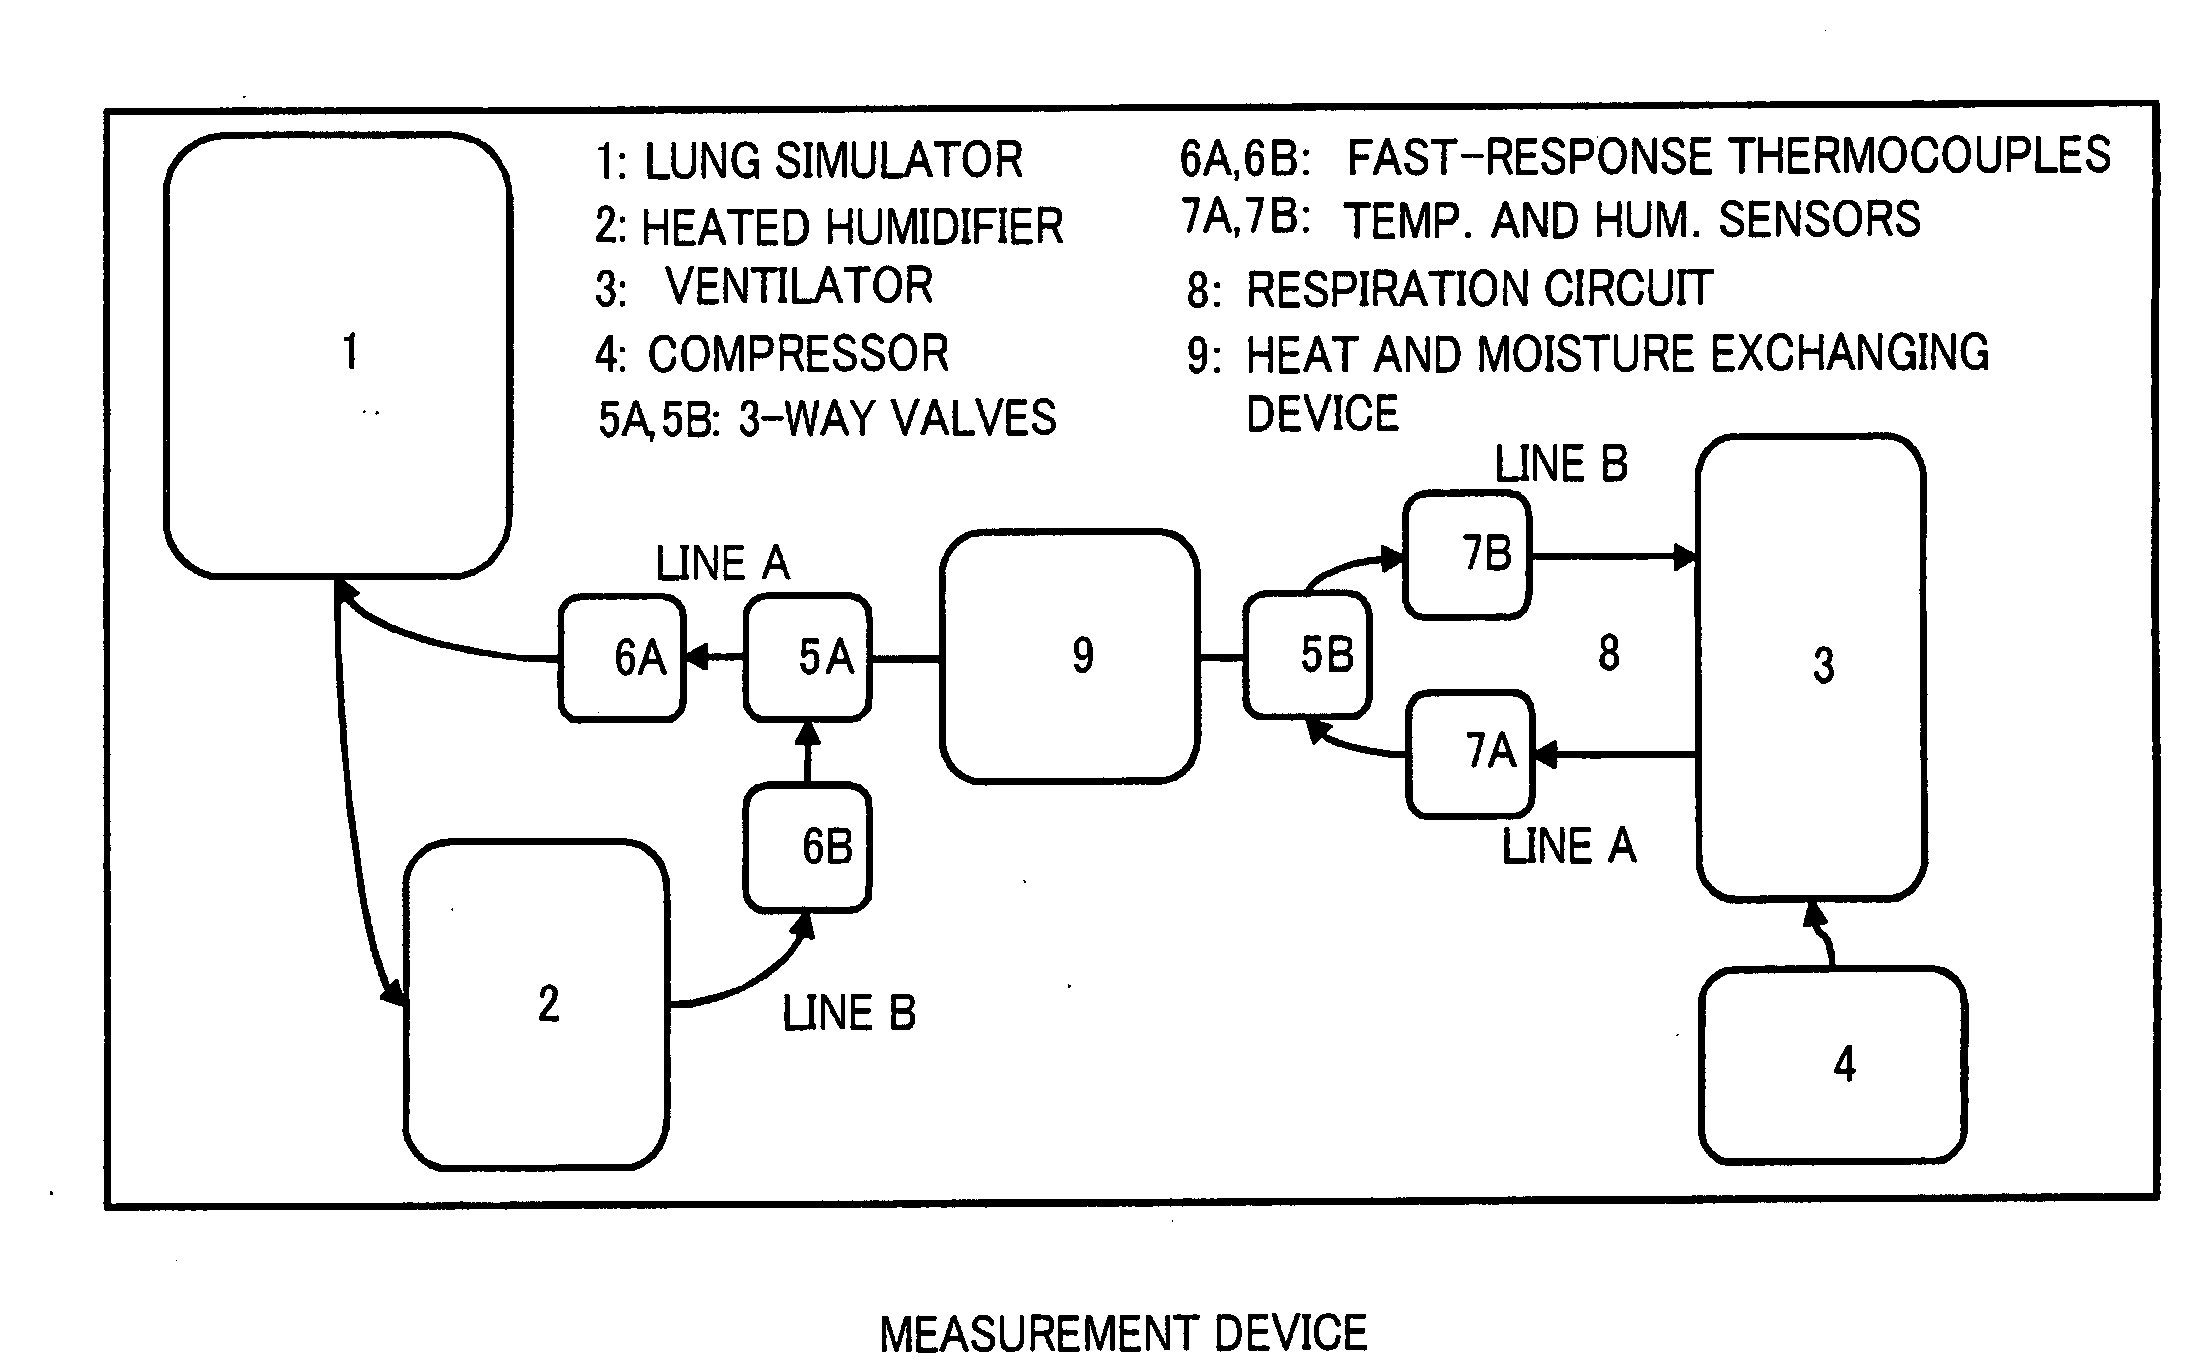 Heat and moisture exchanger, heat and moisture exchanging device, and mask